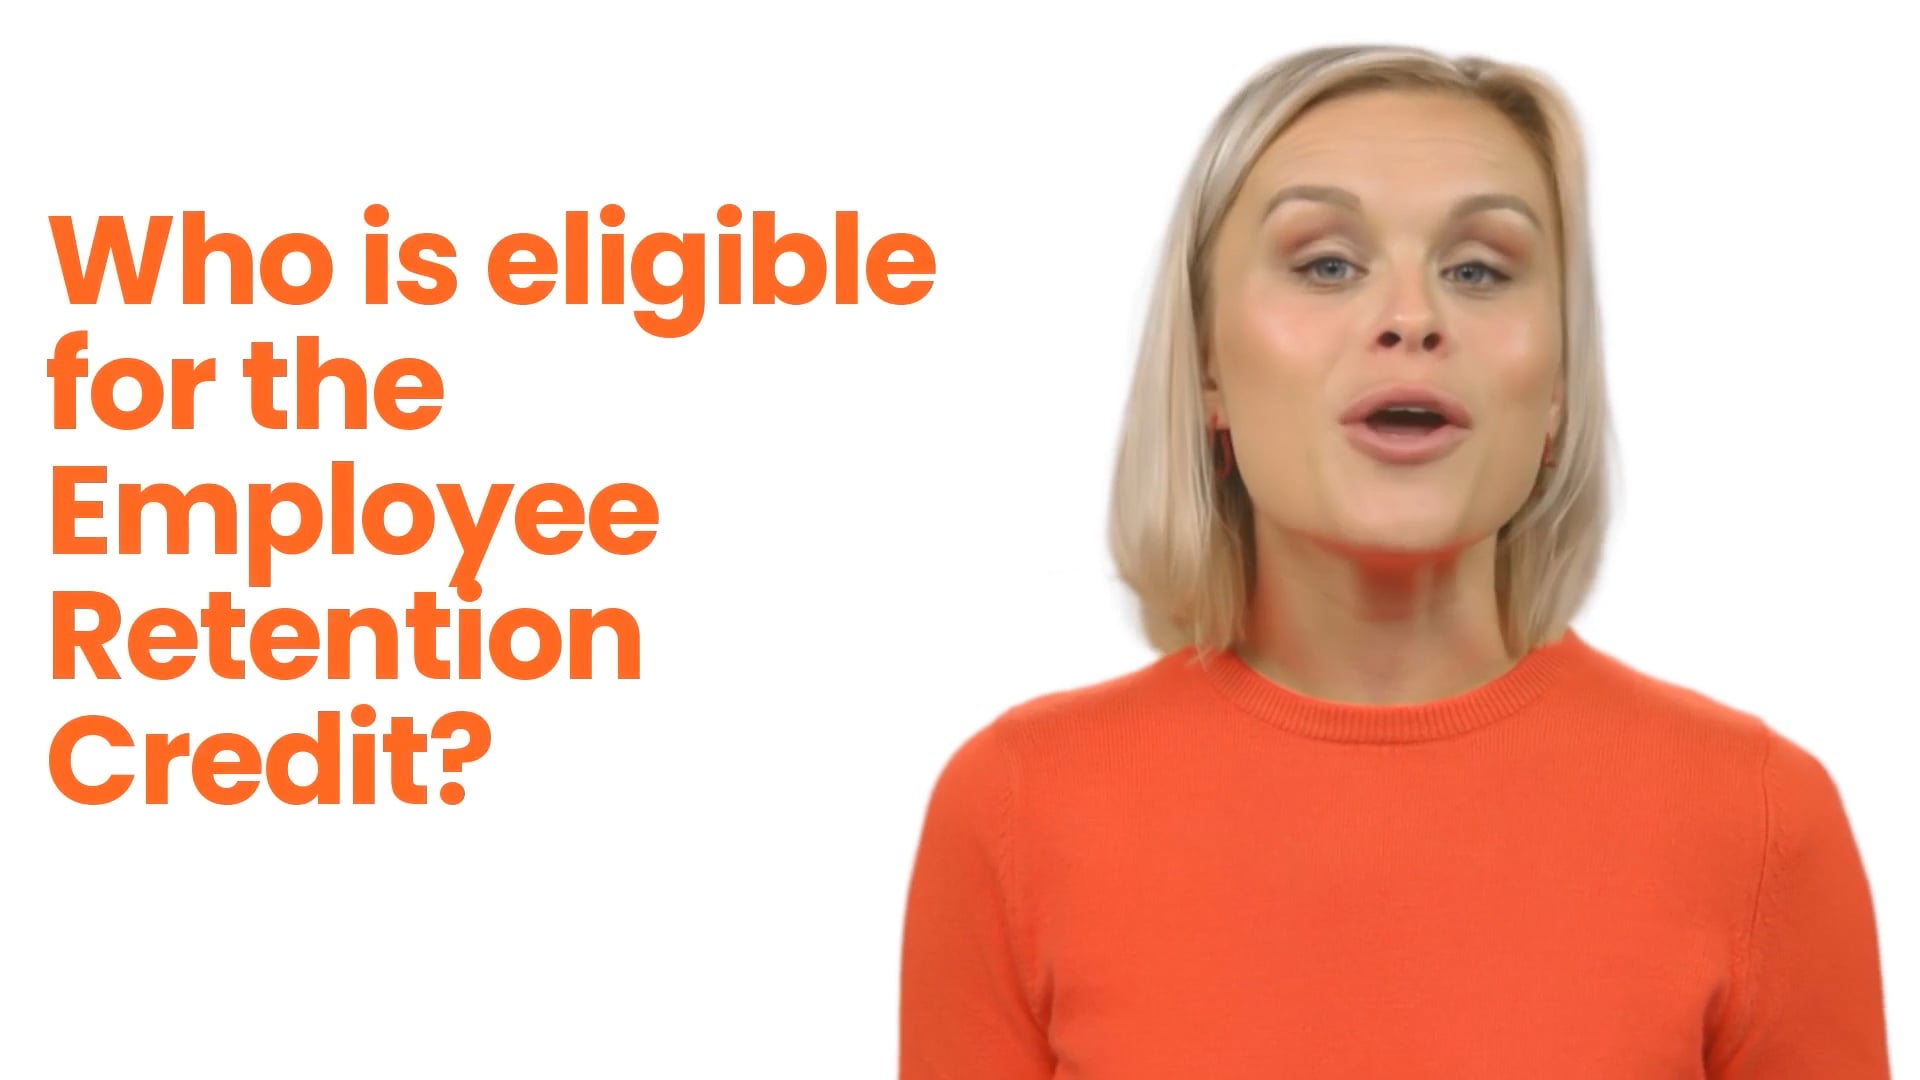 who-is-eligible-for-the-employee-retention-credit-erc-on-vimeo